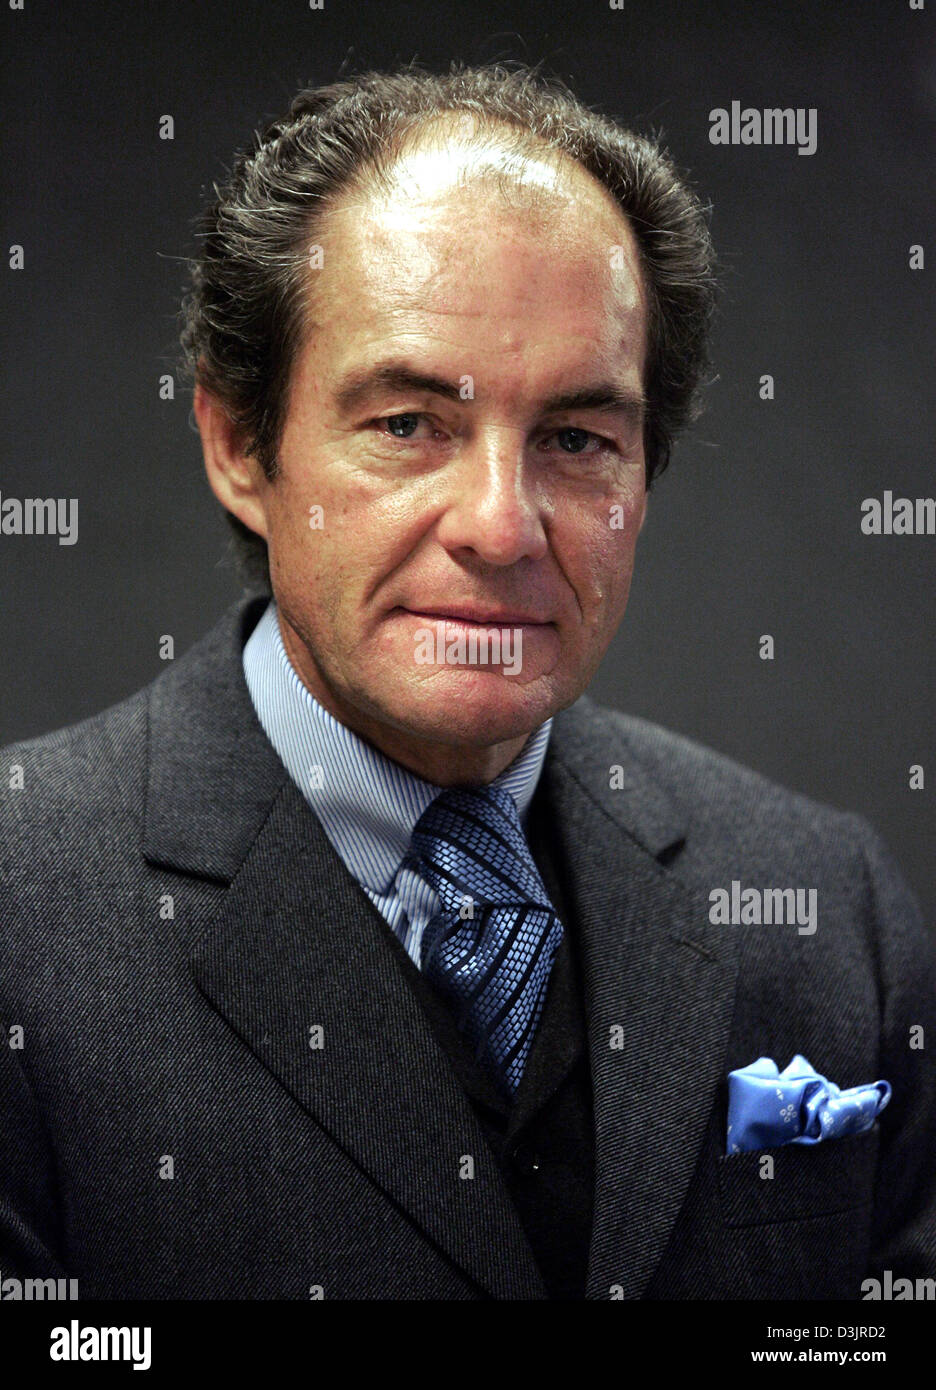 (dpa) - Georg Riedel, business manager of Riedel Tiroler Glashuette, manufacturer of wine glasses, poses for a picture in Munich, Germany, 25 January 2005. After the takeover of Nachtmann, manufacturer of lead crystal,  Riedel is now going to ax around 500 jobs. Nachtmann is going to cut around 400 jobs and Riedel around 100 jobs by 2006 in order to lower the costs and limit the lo Stock Photo